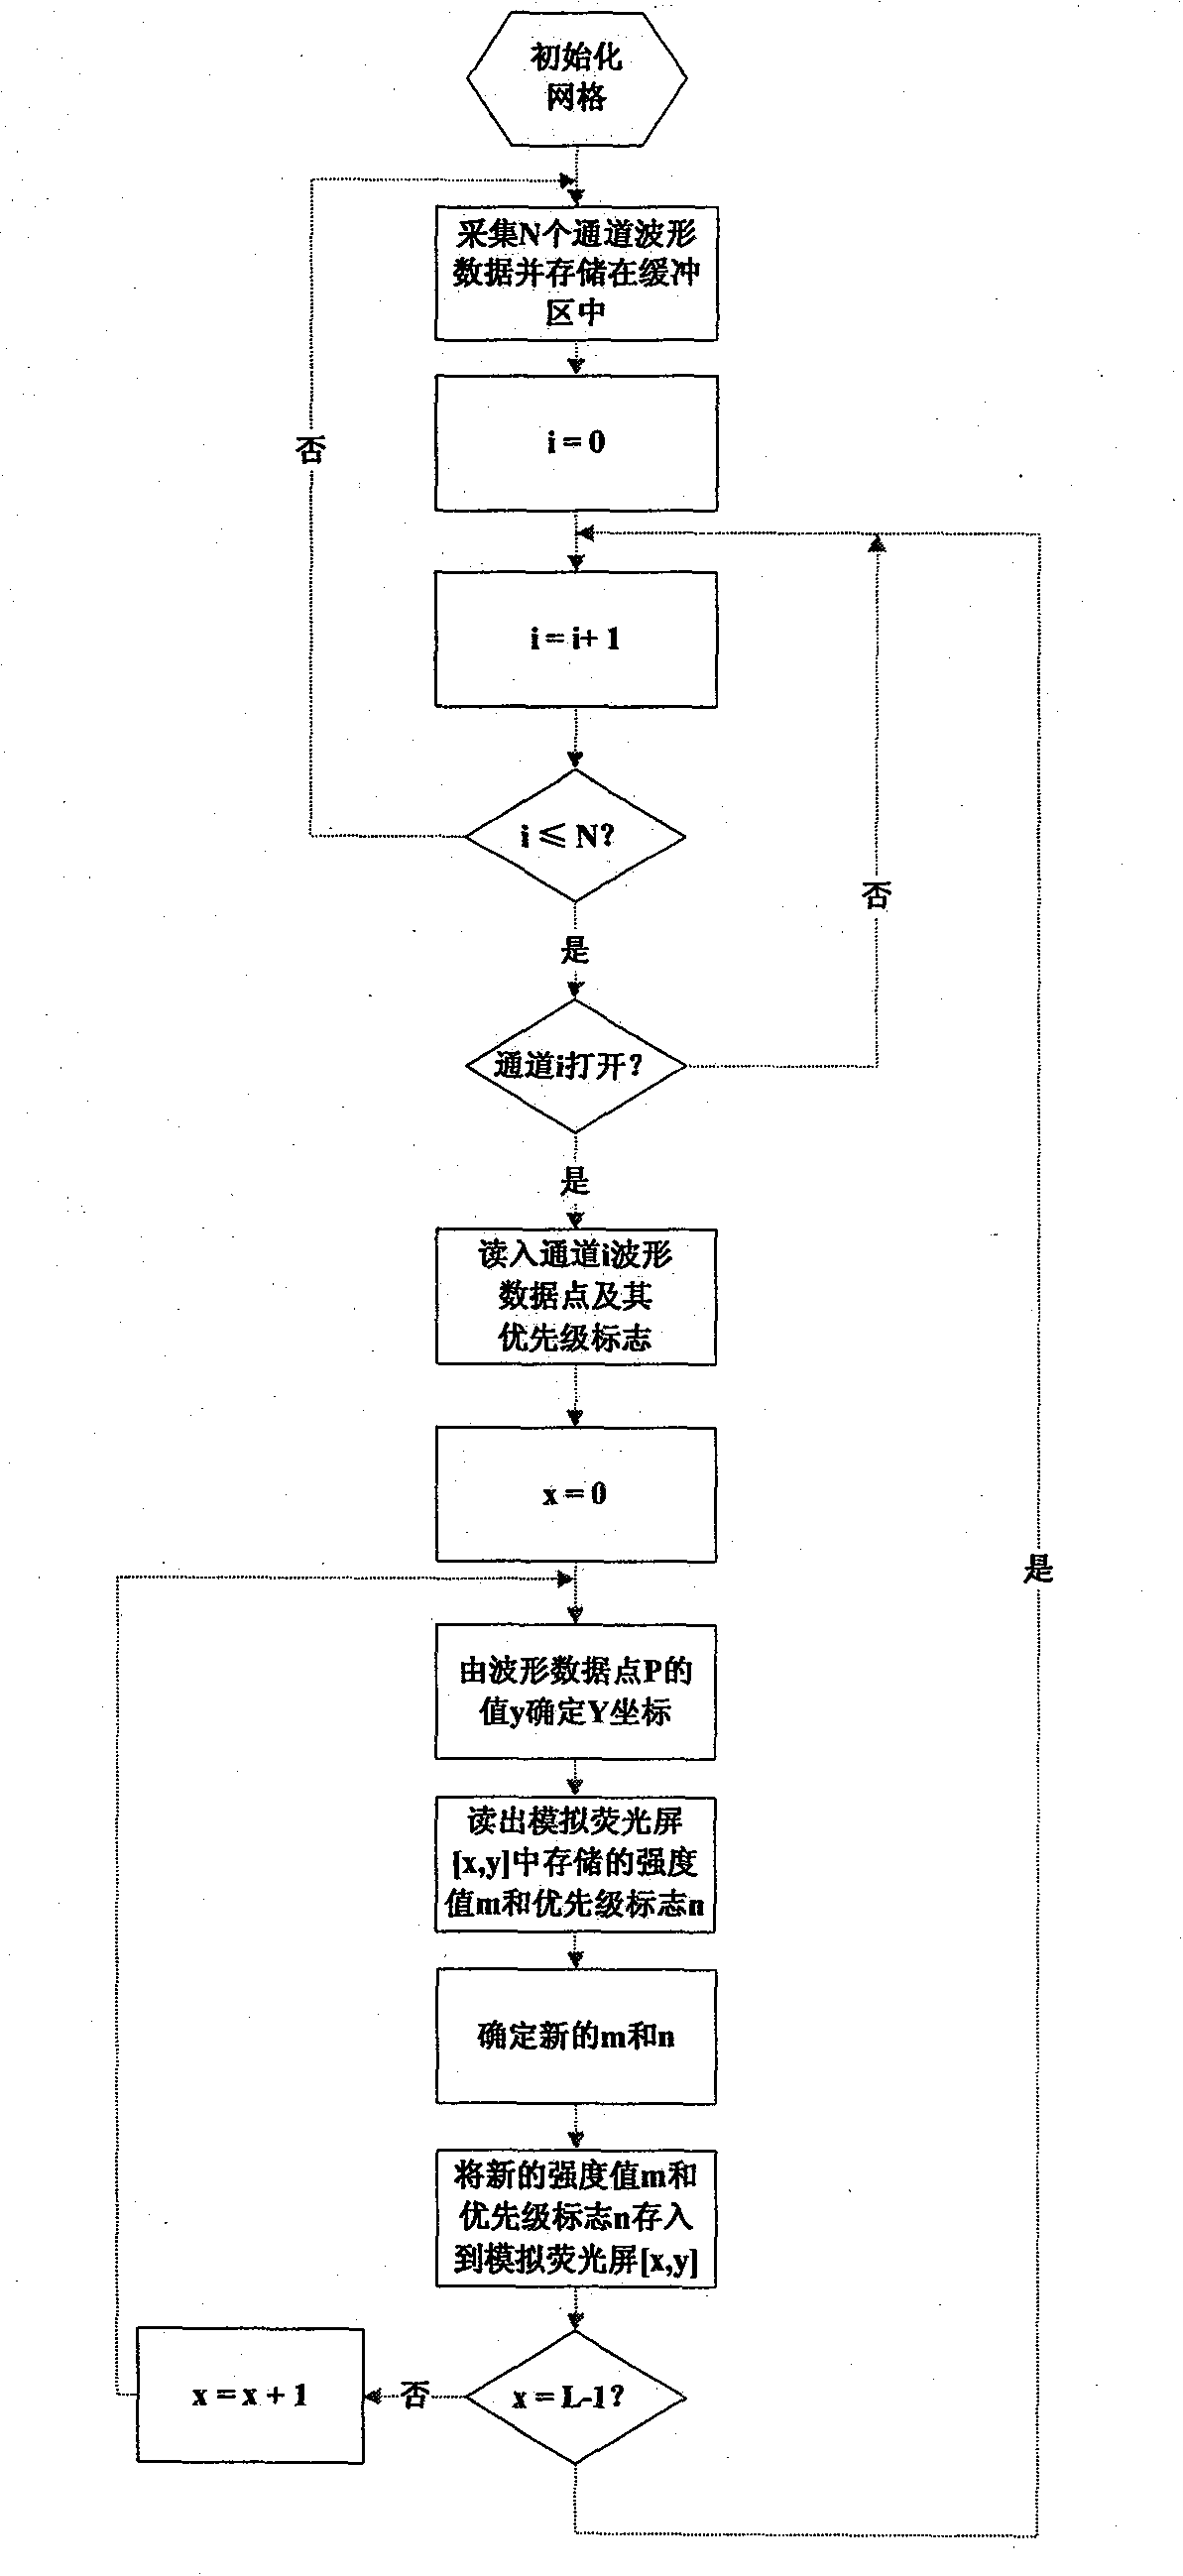 Method of realizing wave-shape fluorescent display effect by multiple-channel digital oscilloscope